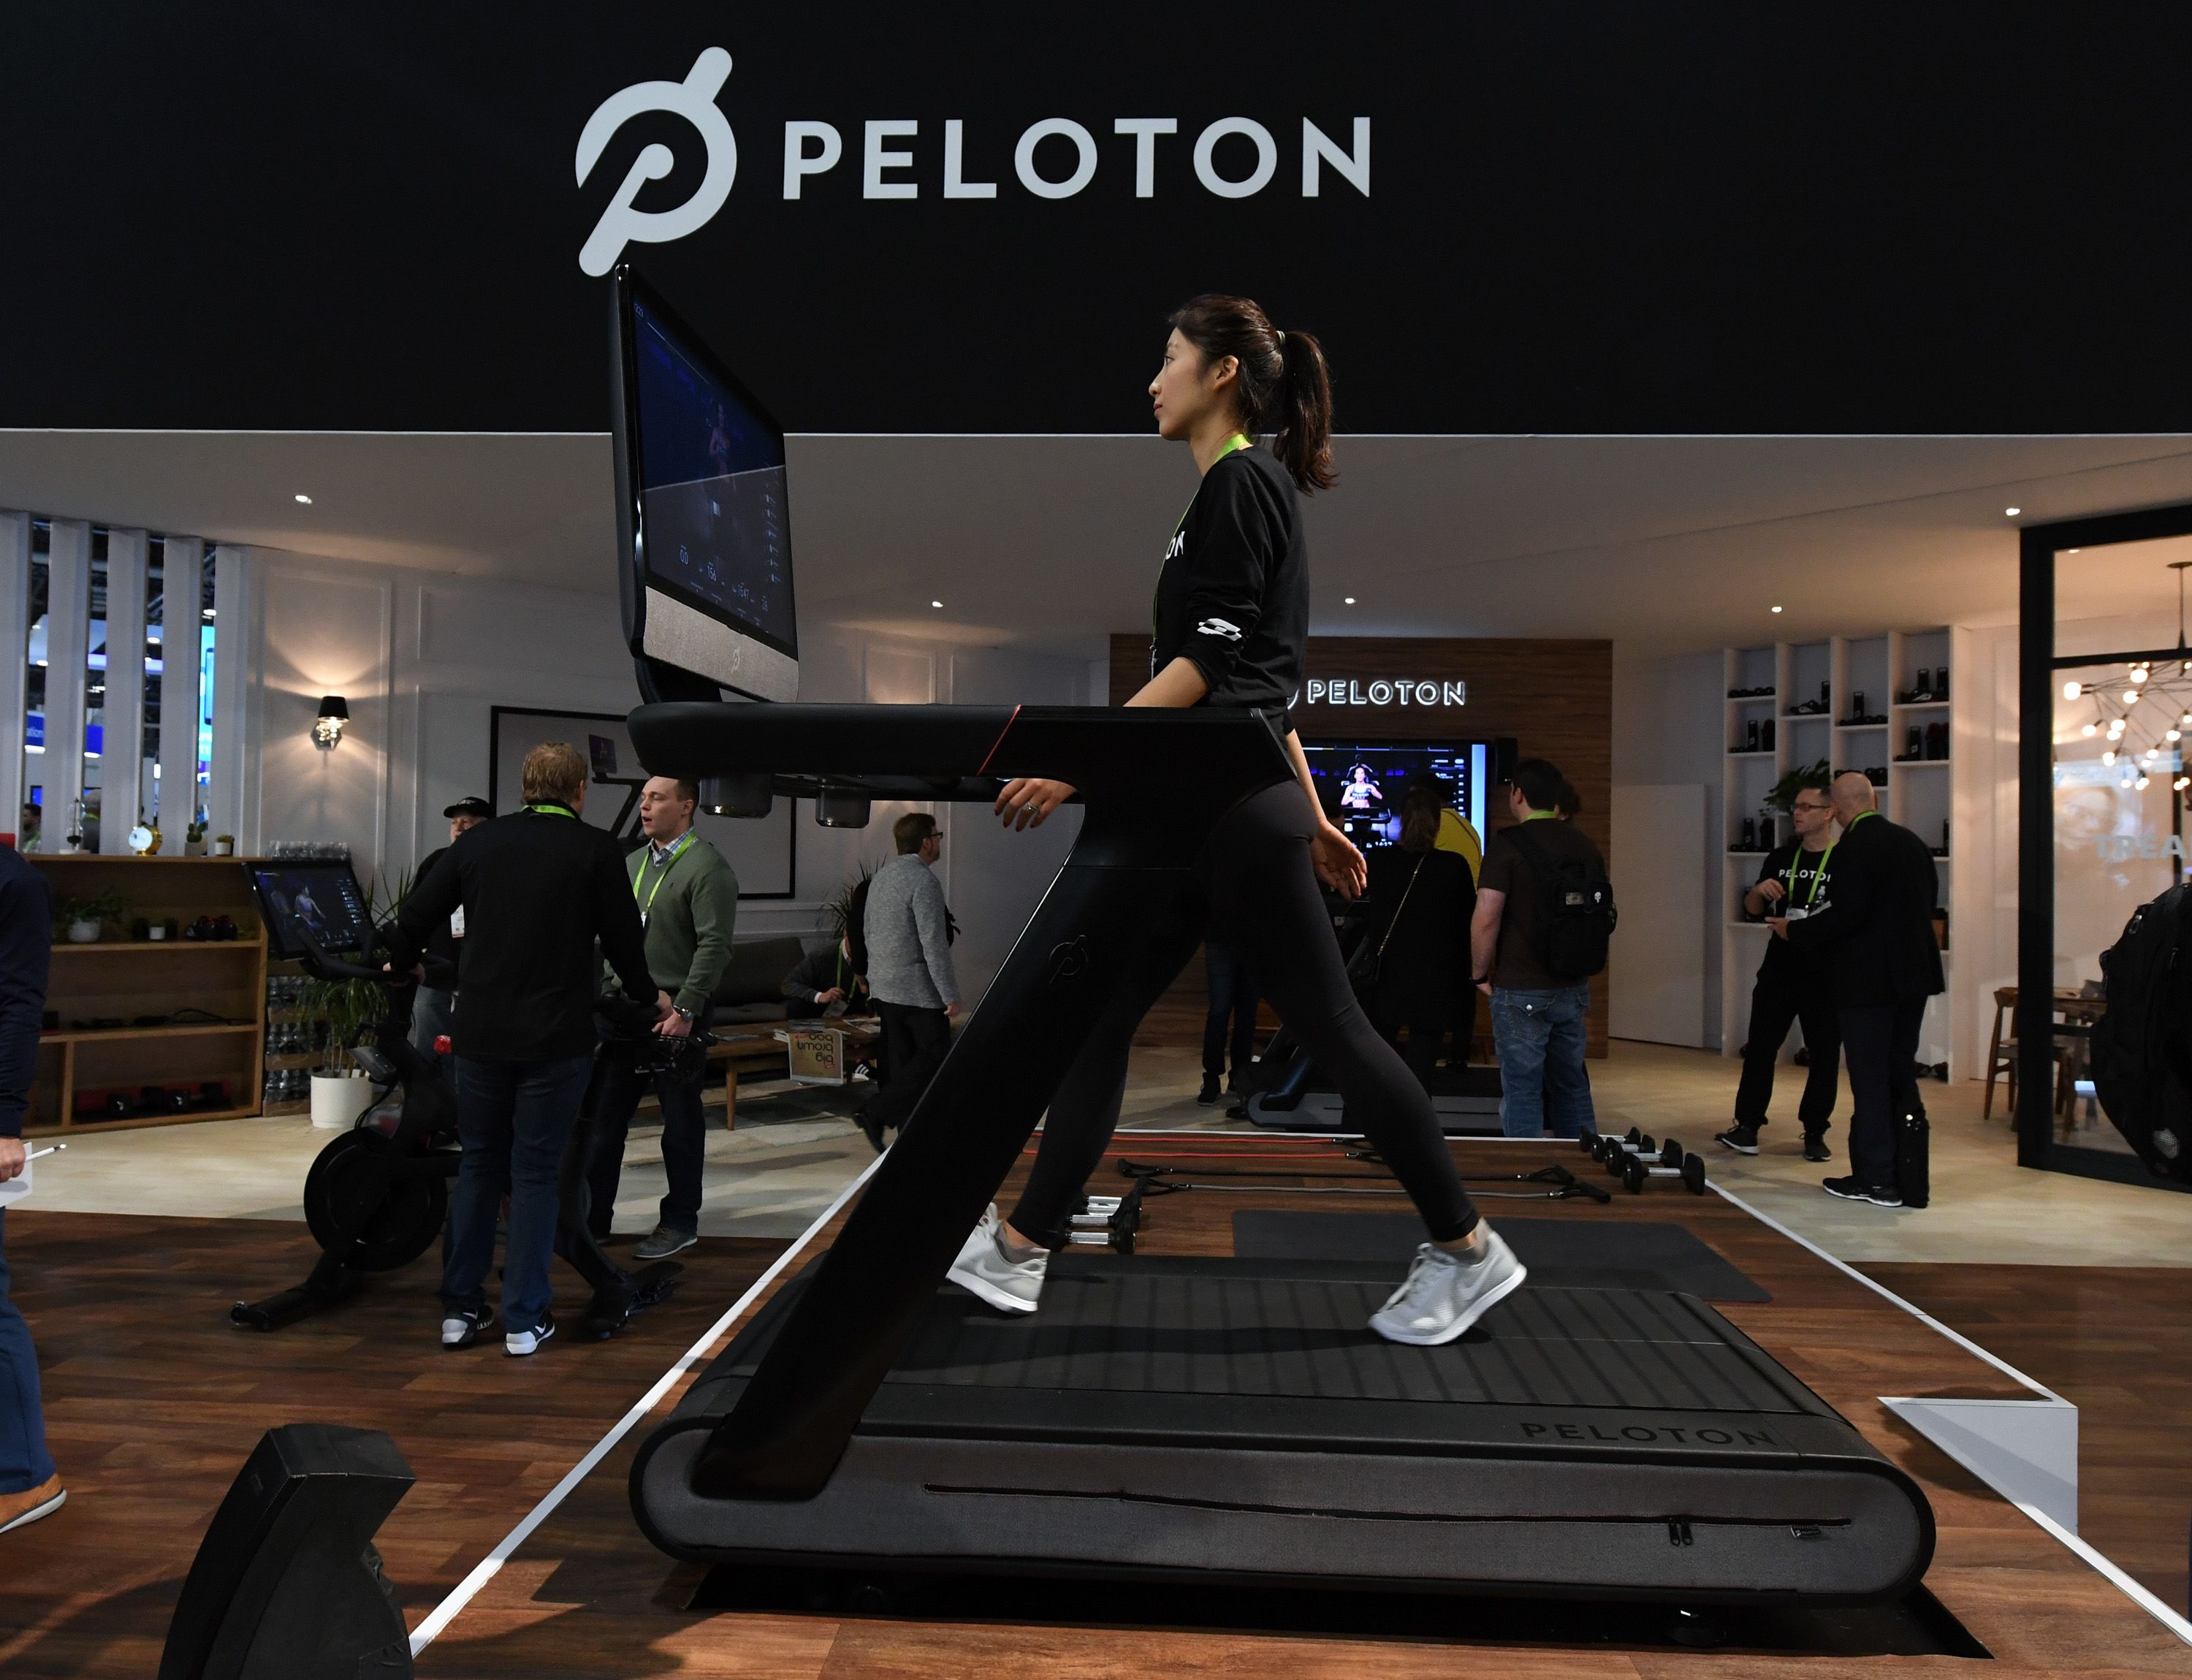 Fitness company Peloton says it has filed for an IPO